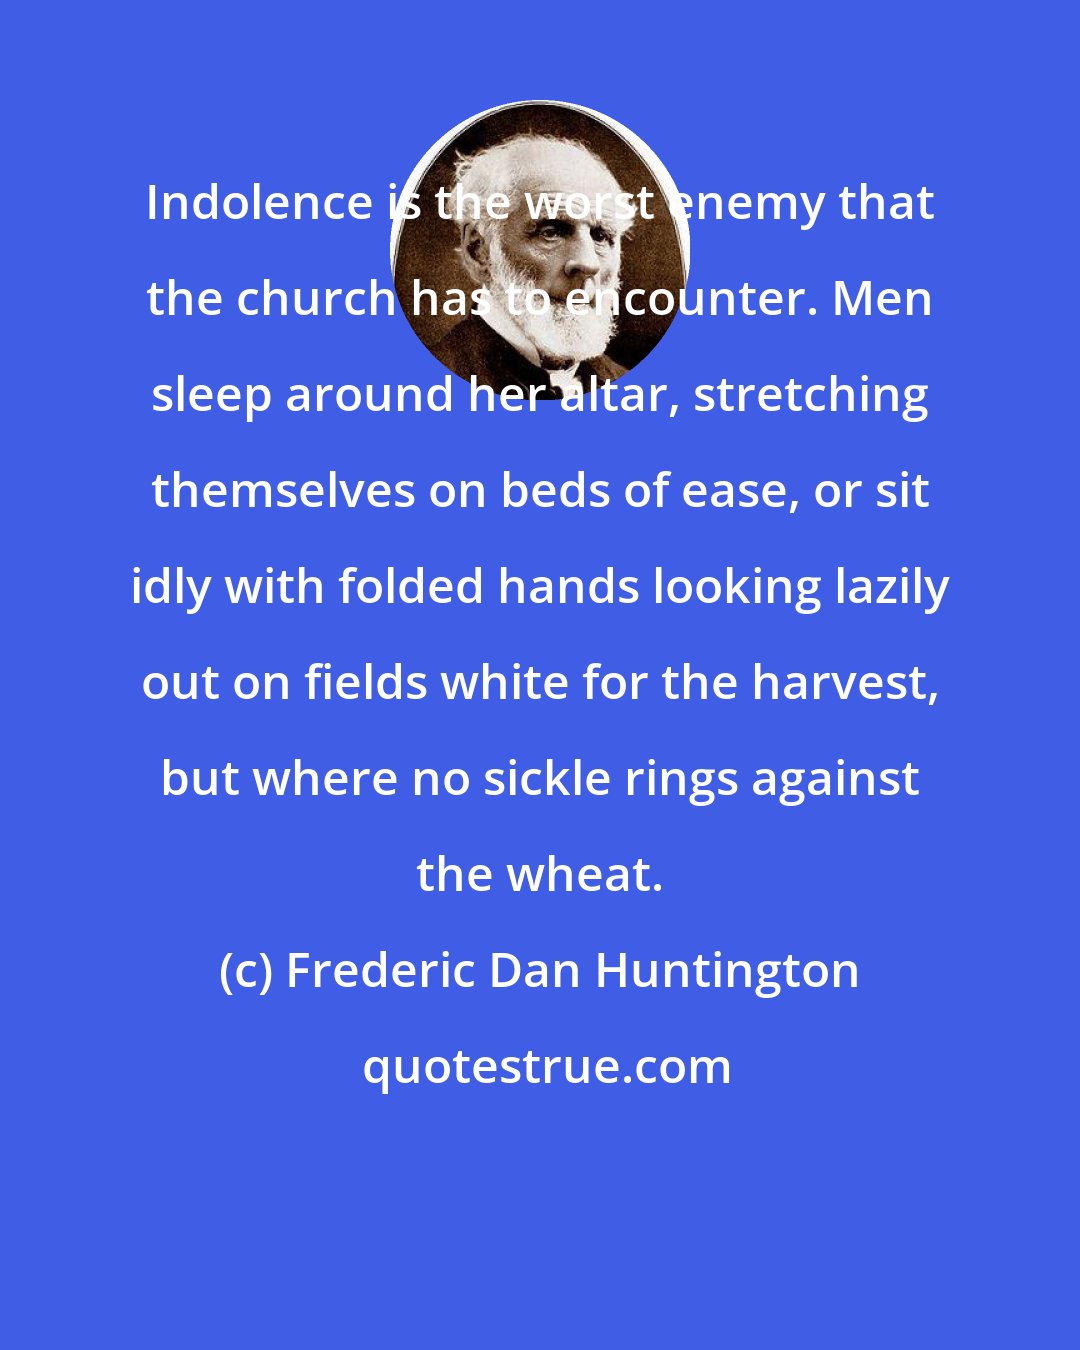 Frederic Dan Huntington: Indolence is the worst enemy that the church has to encounter. Men sleep around her altar, stretching themselves on beds of ease, or sit idly with folded hands looking lazily out on fields white for the harvest, but where no sickle rings against the wheat.